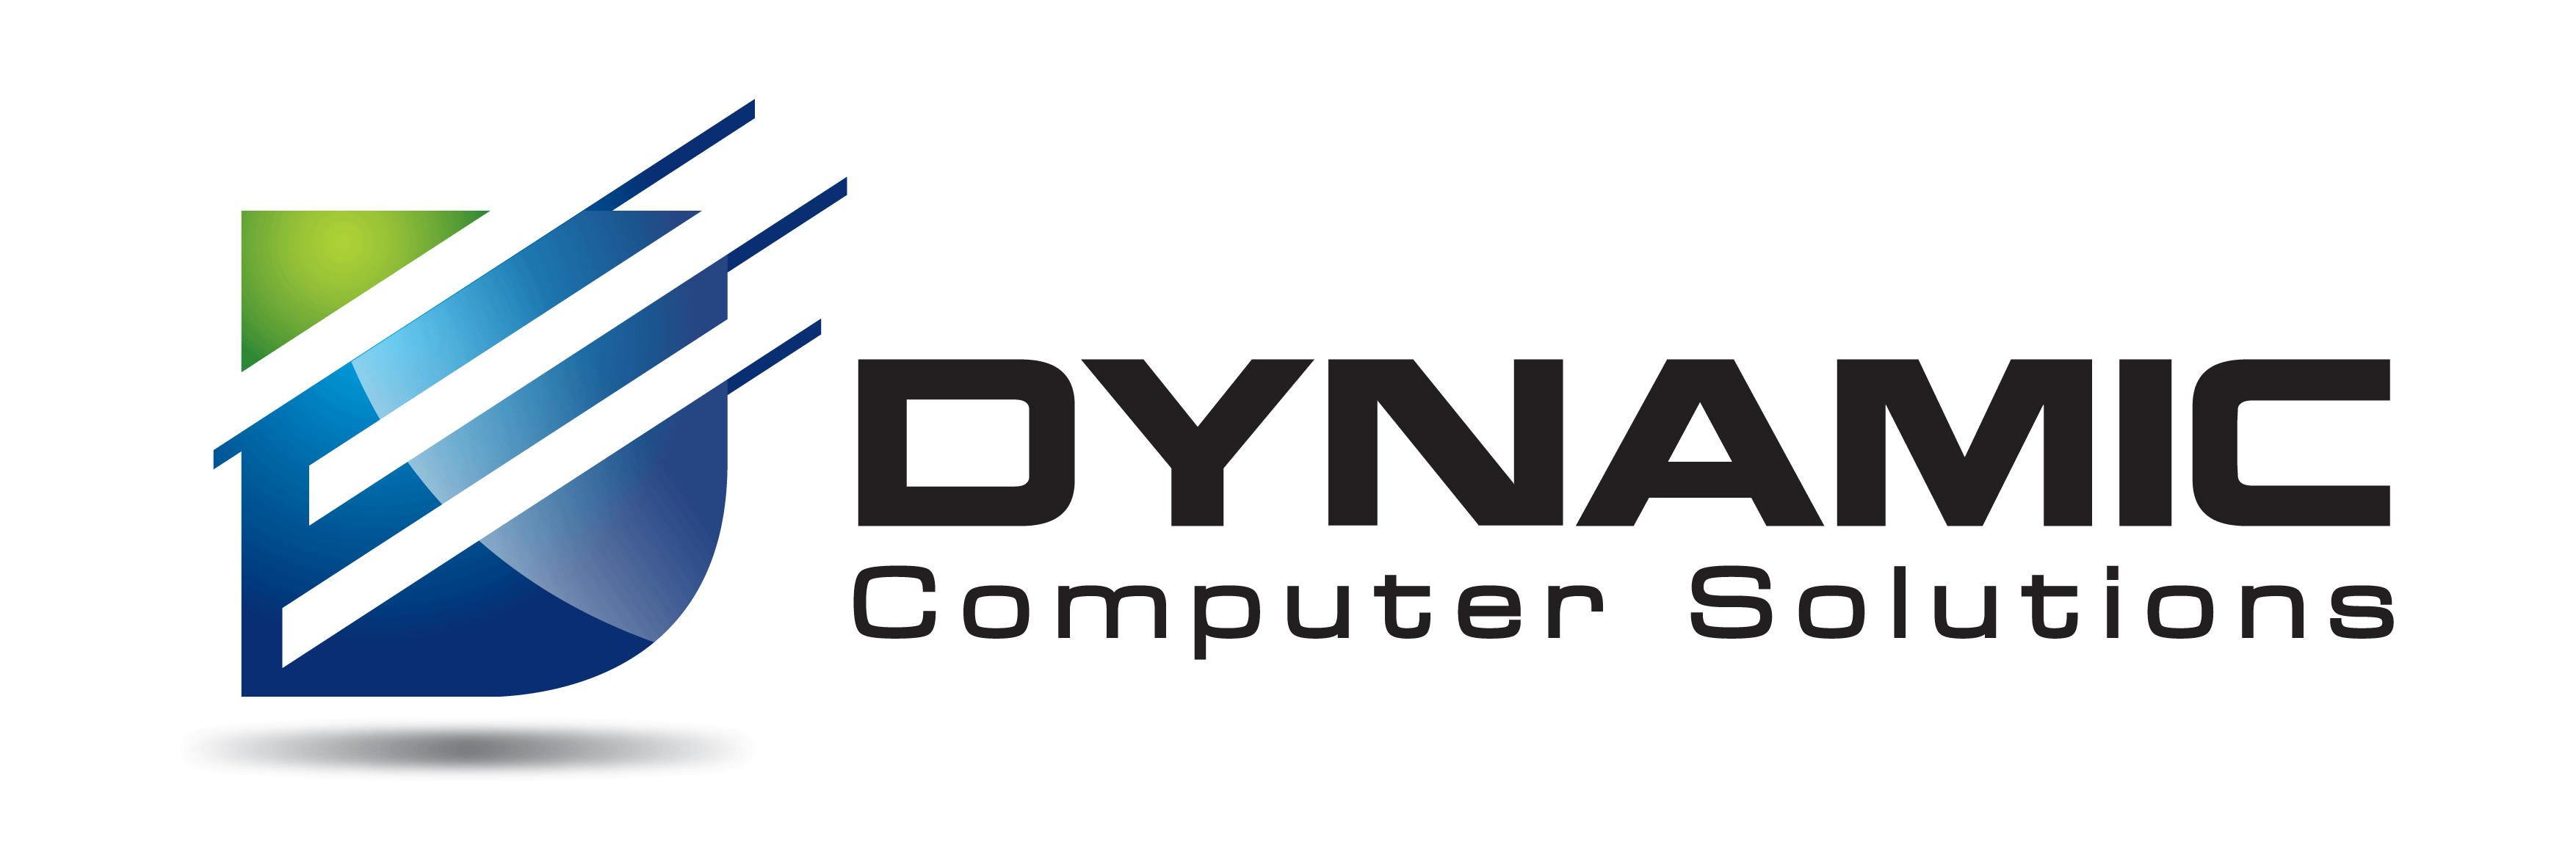 Dynamic Computer Solutions, Inc.